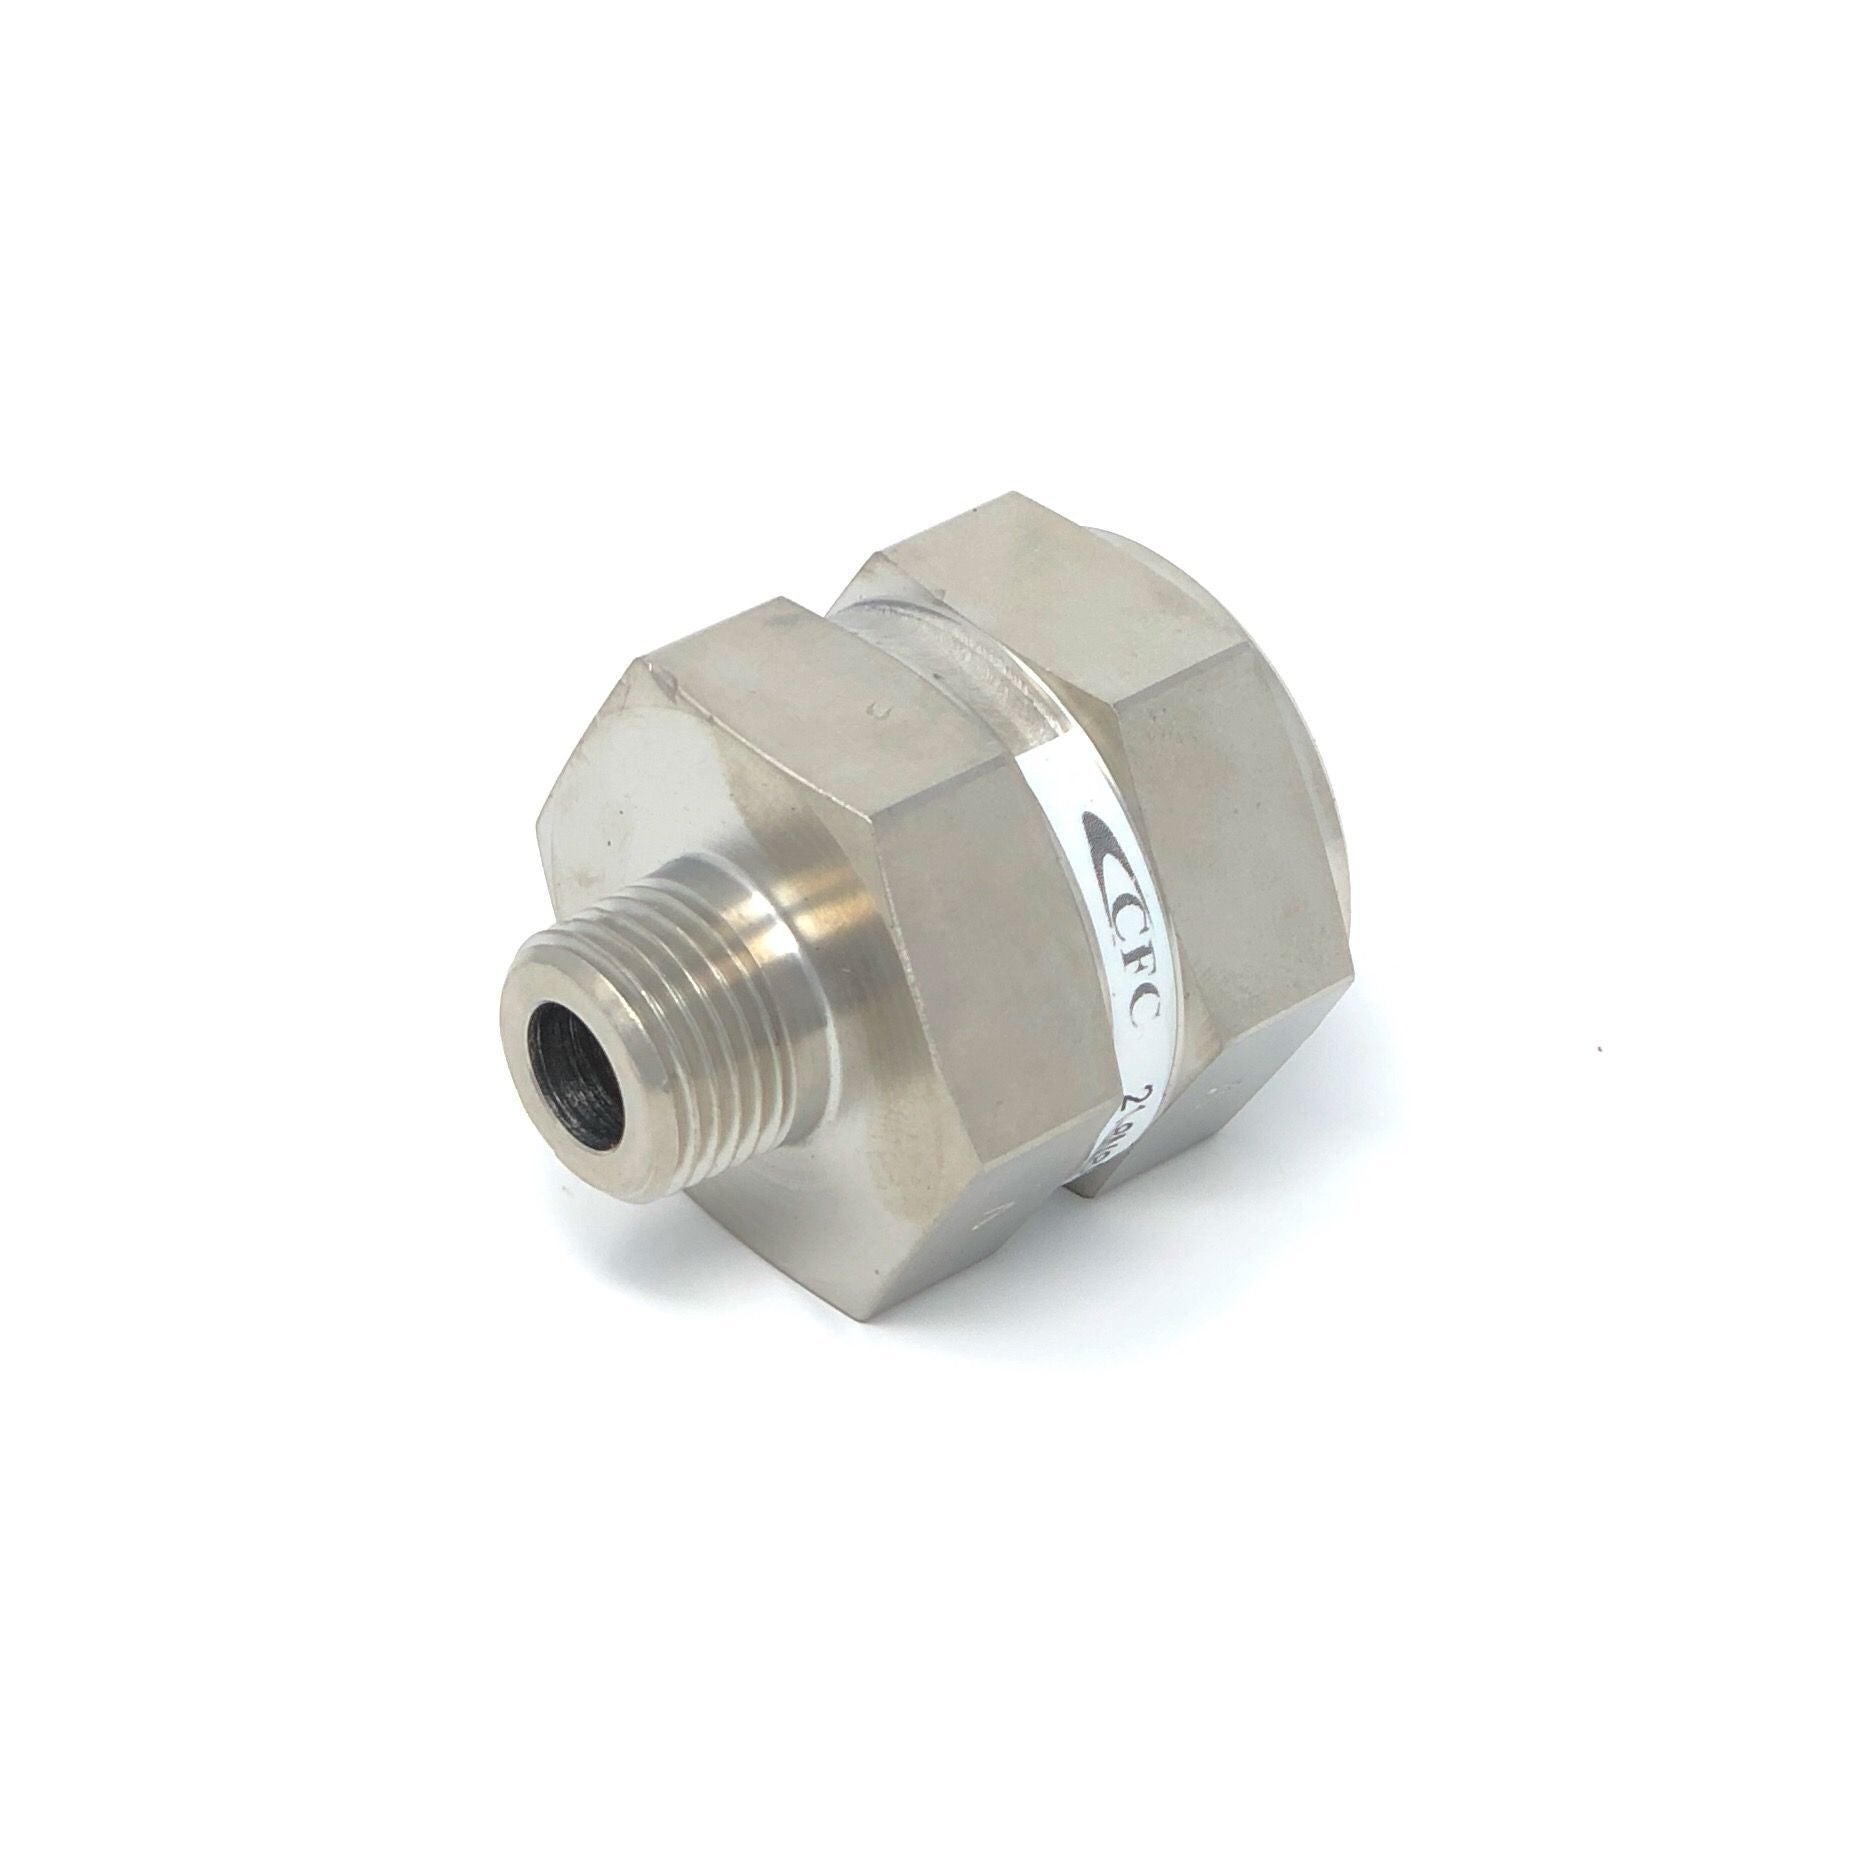 21-4S4S-25S : Chase High Pressure Inline Filter, 6000psi, #4 SAE (1/4"), 25 Micron, No Visual Indicator, No Bypass